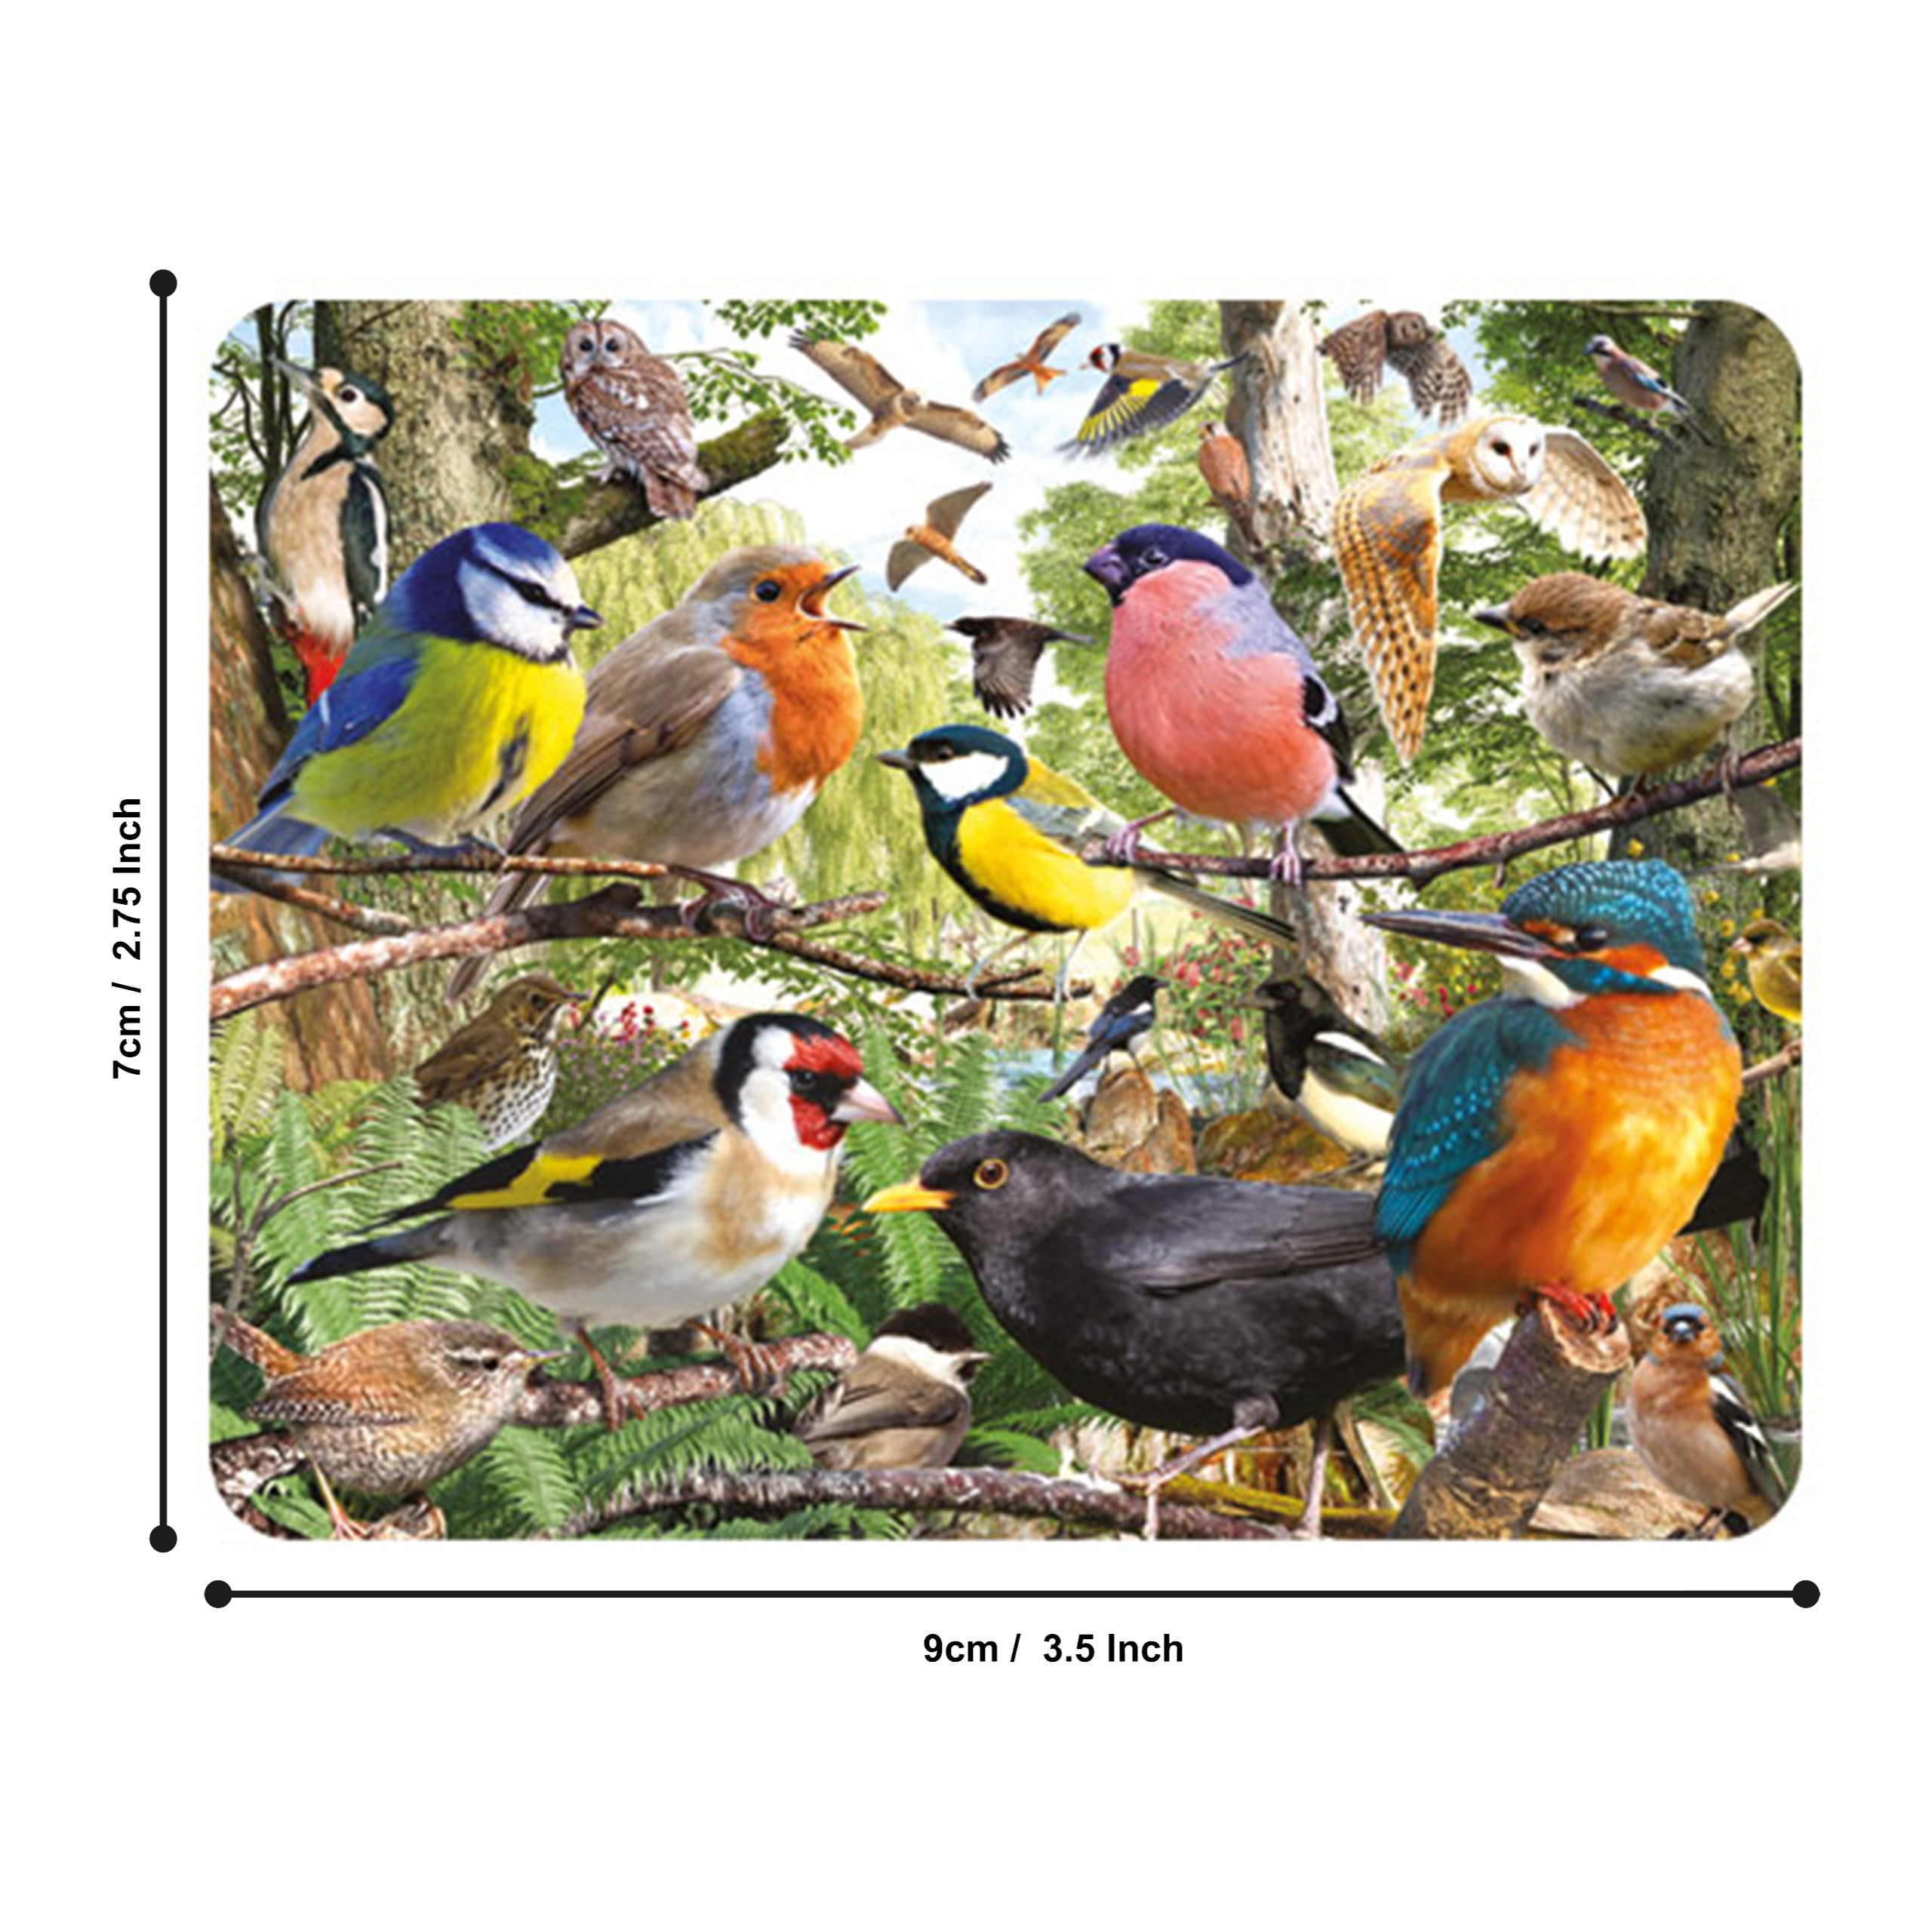 3D LiveLife Magnet - Nature's Home from Deluxebase. Lenticular 3D Bird  Fridge Magnet. Magnetic decor for kids and adults with artwork licensed  from 